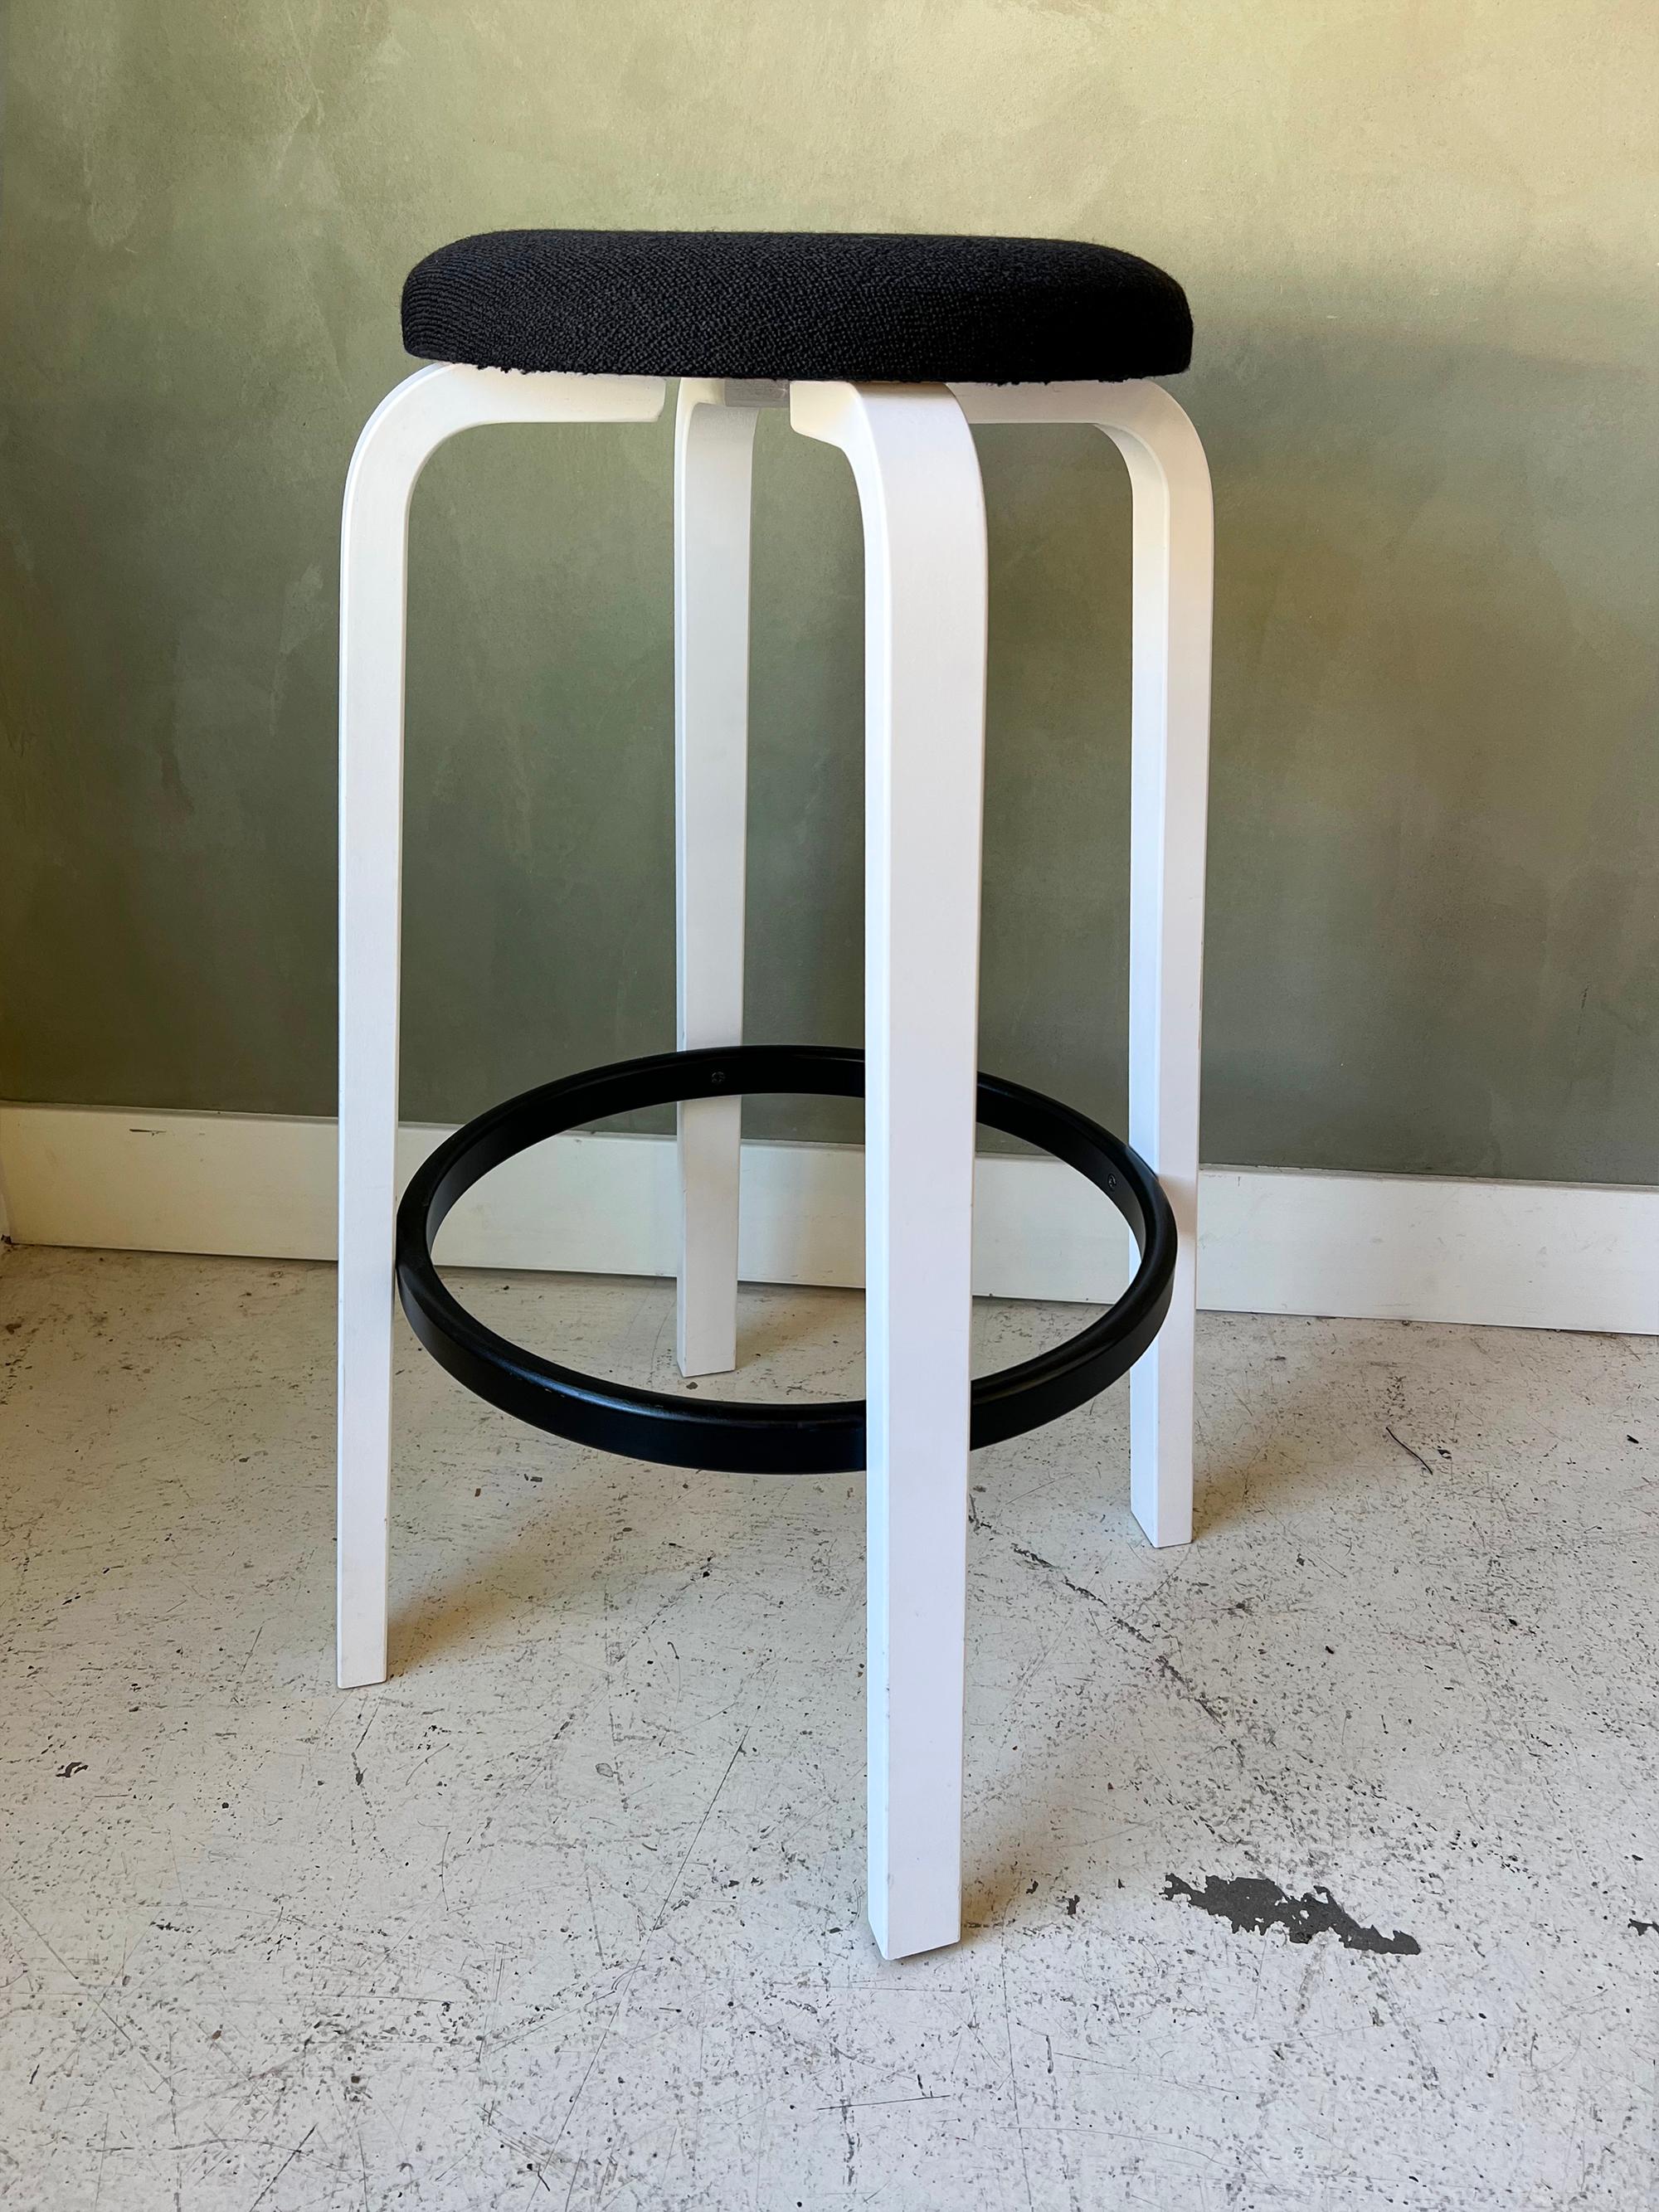 Newer production bar stool by Alvar Aalto for Artek. Custom color scheme with white legs, black footrest, and black upholstery. Upholstery is clean and some have small chips in the paint but are overall in like-new condition.